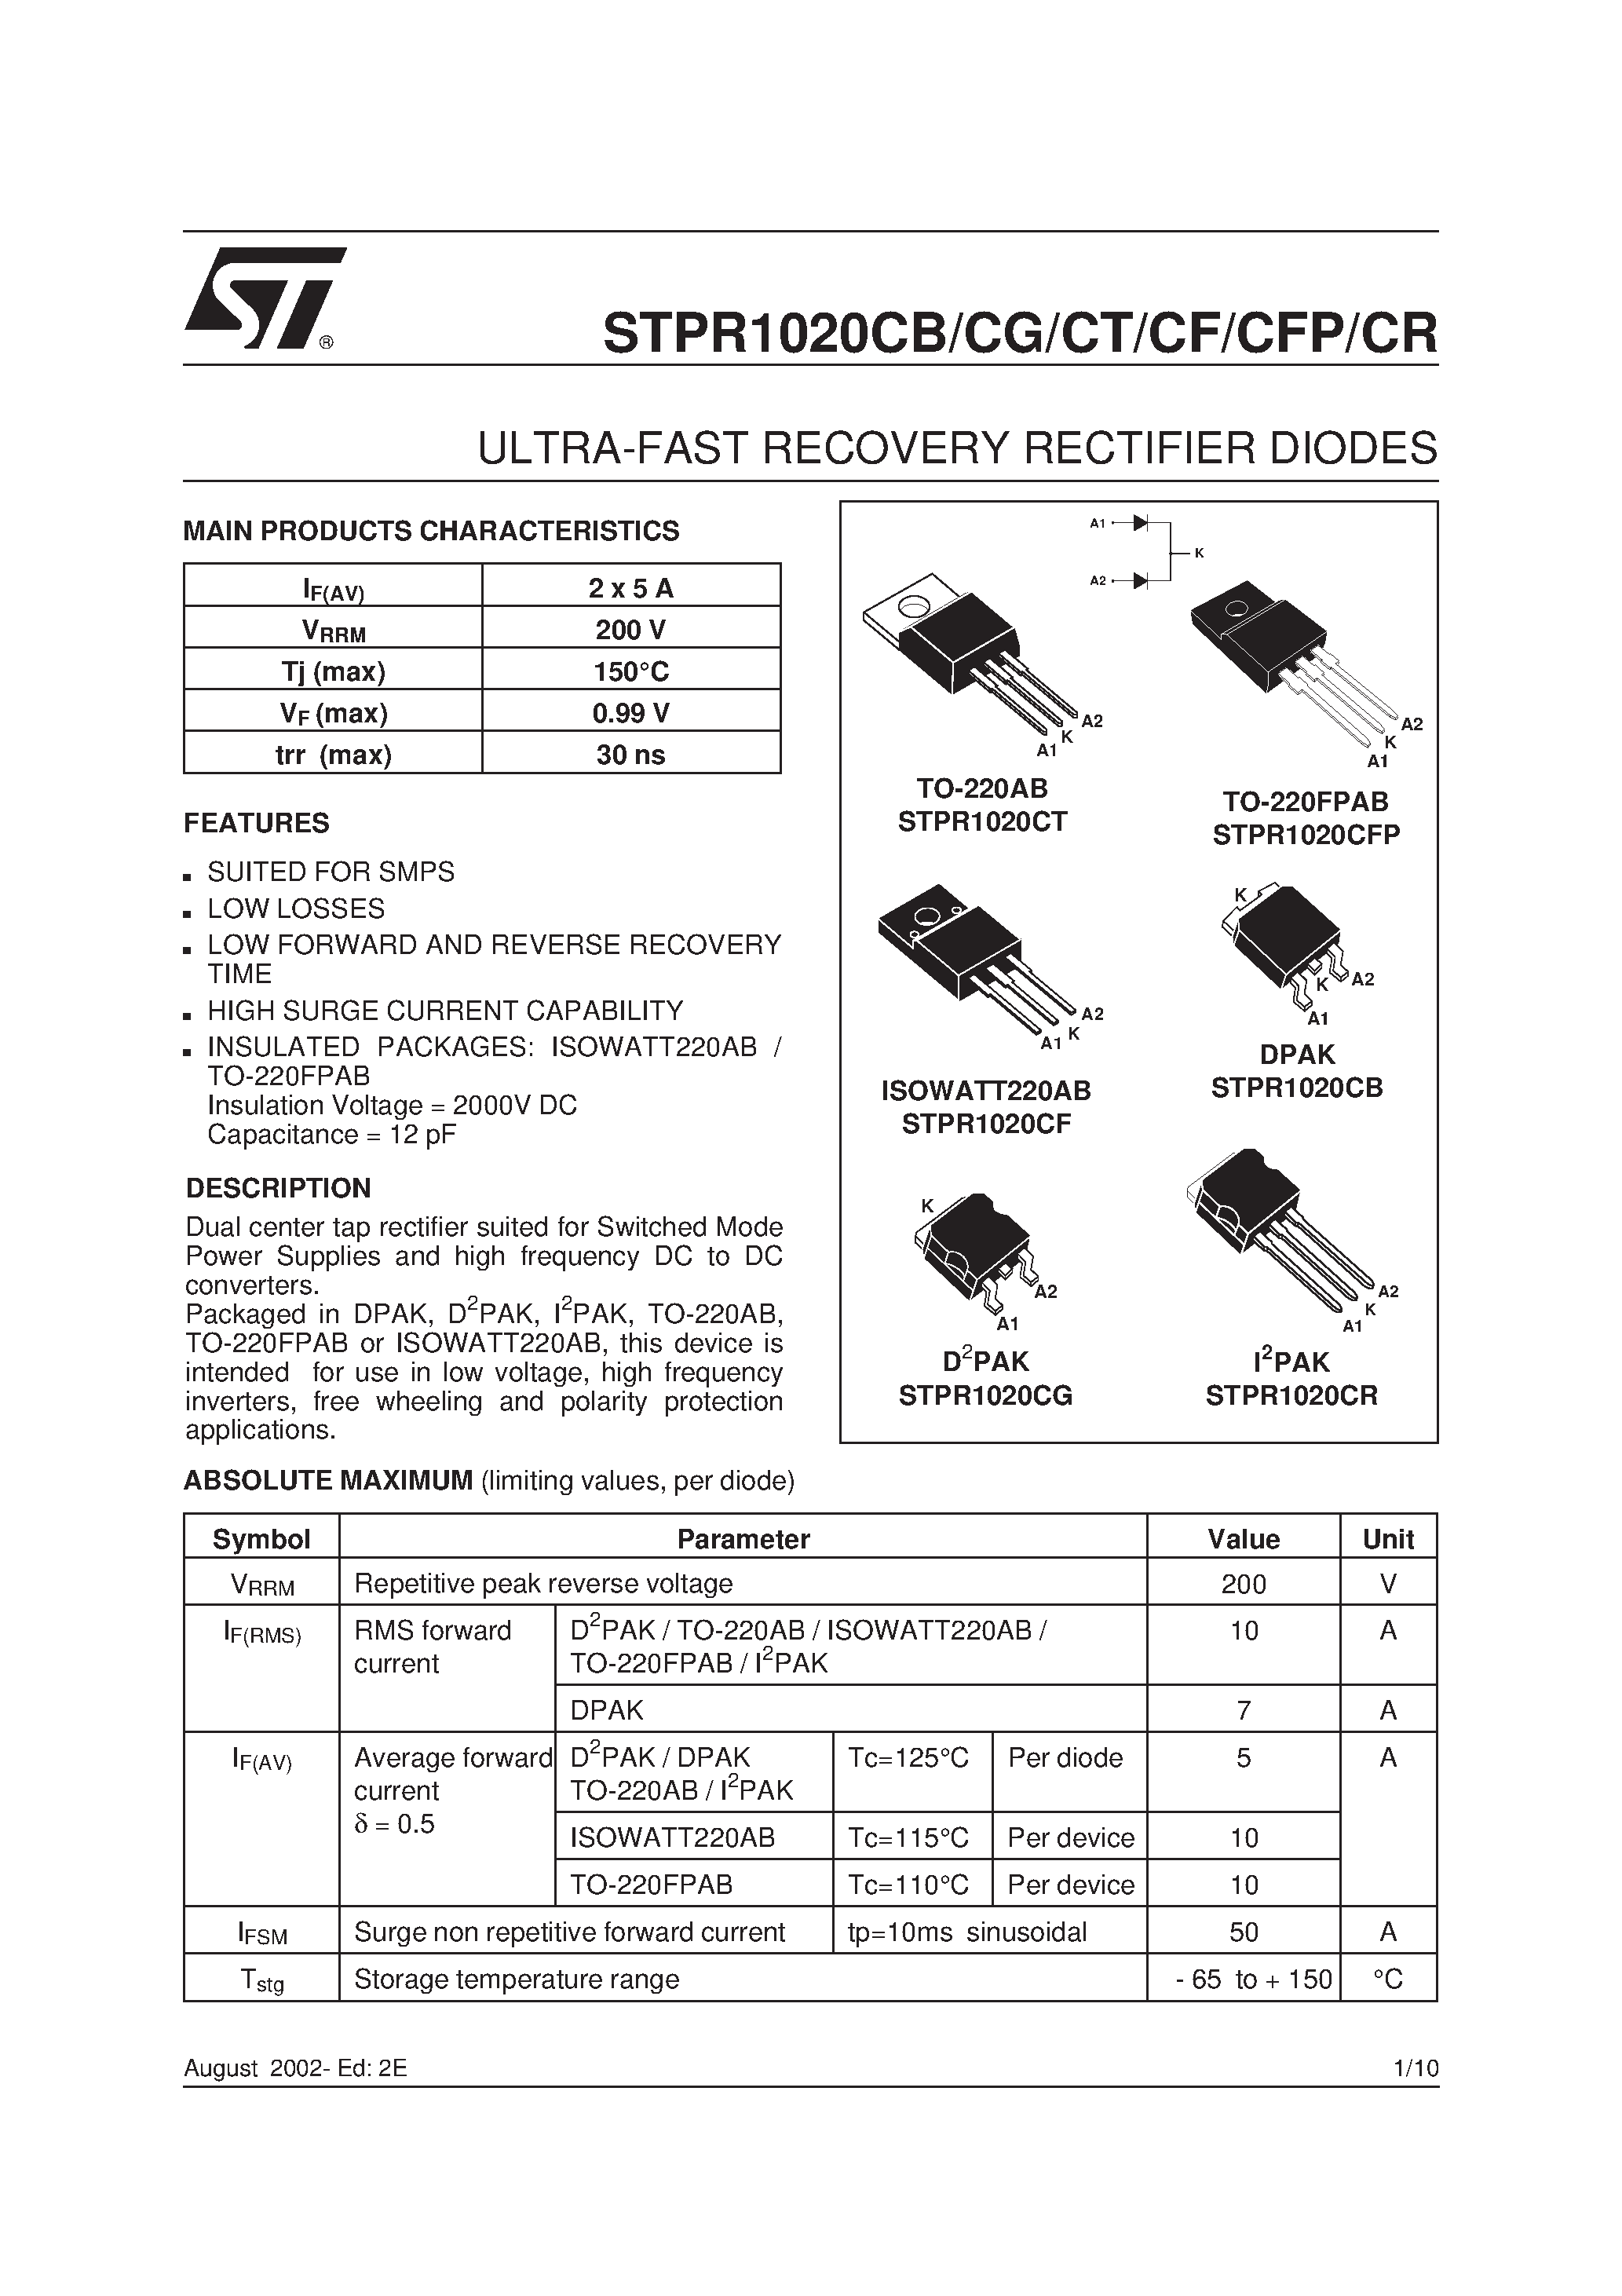 Datasheet STPR1020 - ULTRA-FAST RECOVERY RECTIFIER DIODES page 1